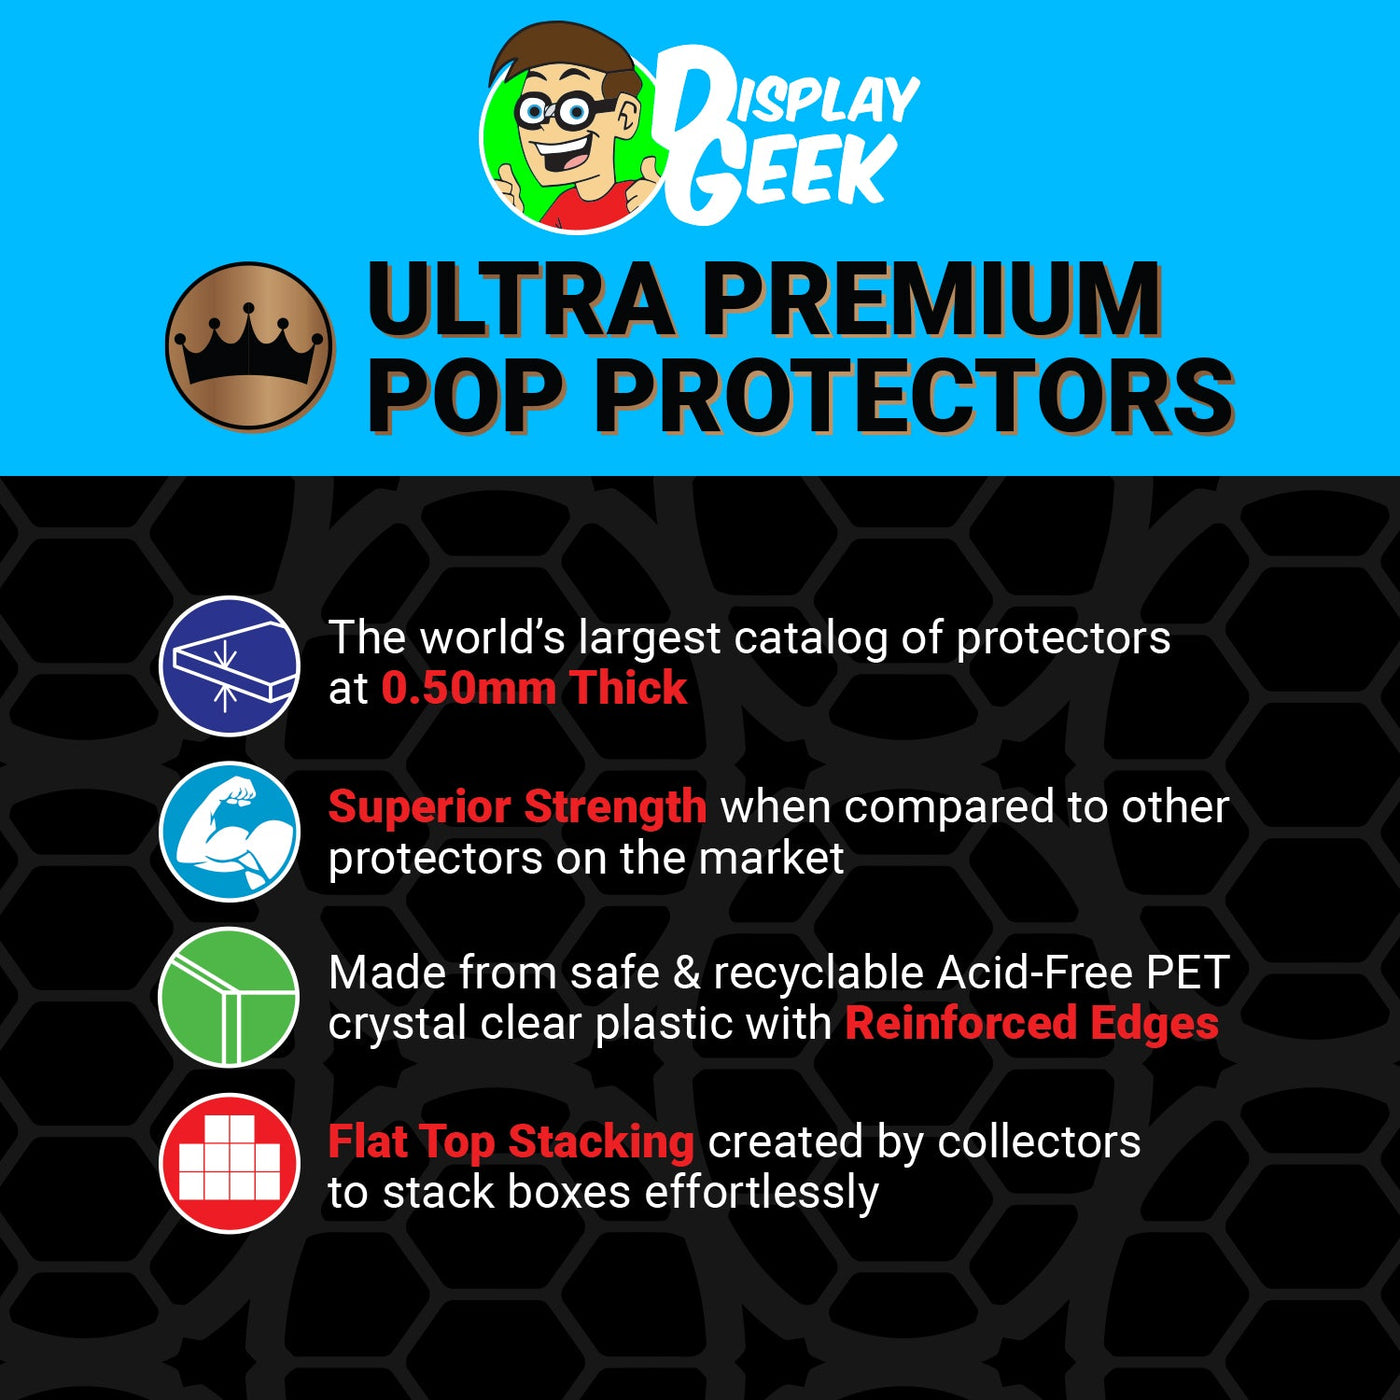 Pop Protector for 10 inch Boba Fett #367 Jumbo Funko Pop on The Protector Guide App by Display Geek